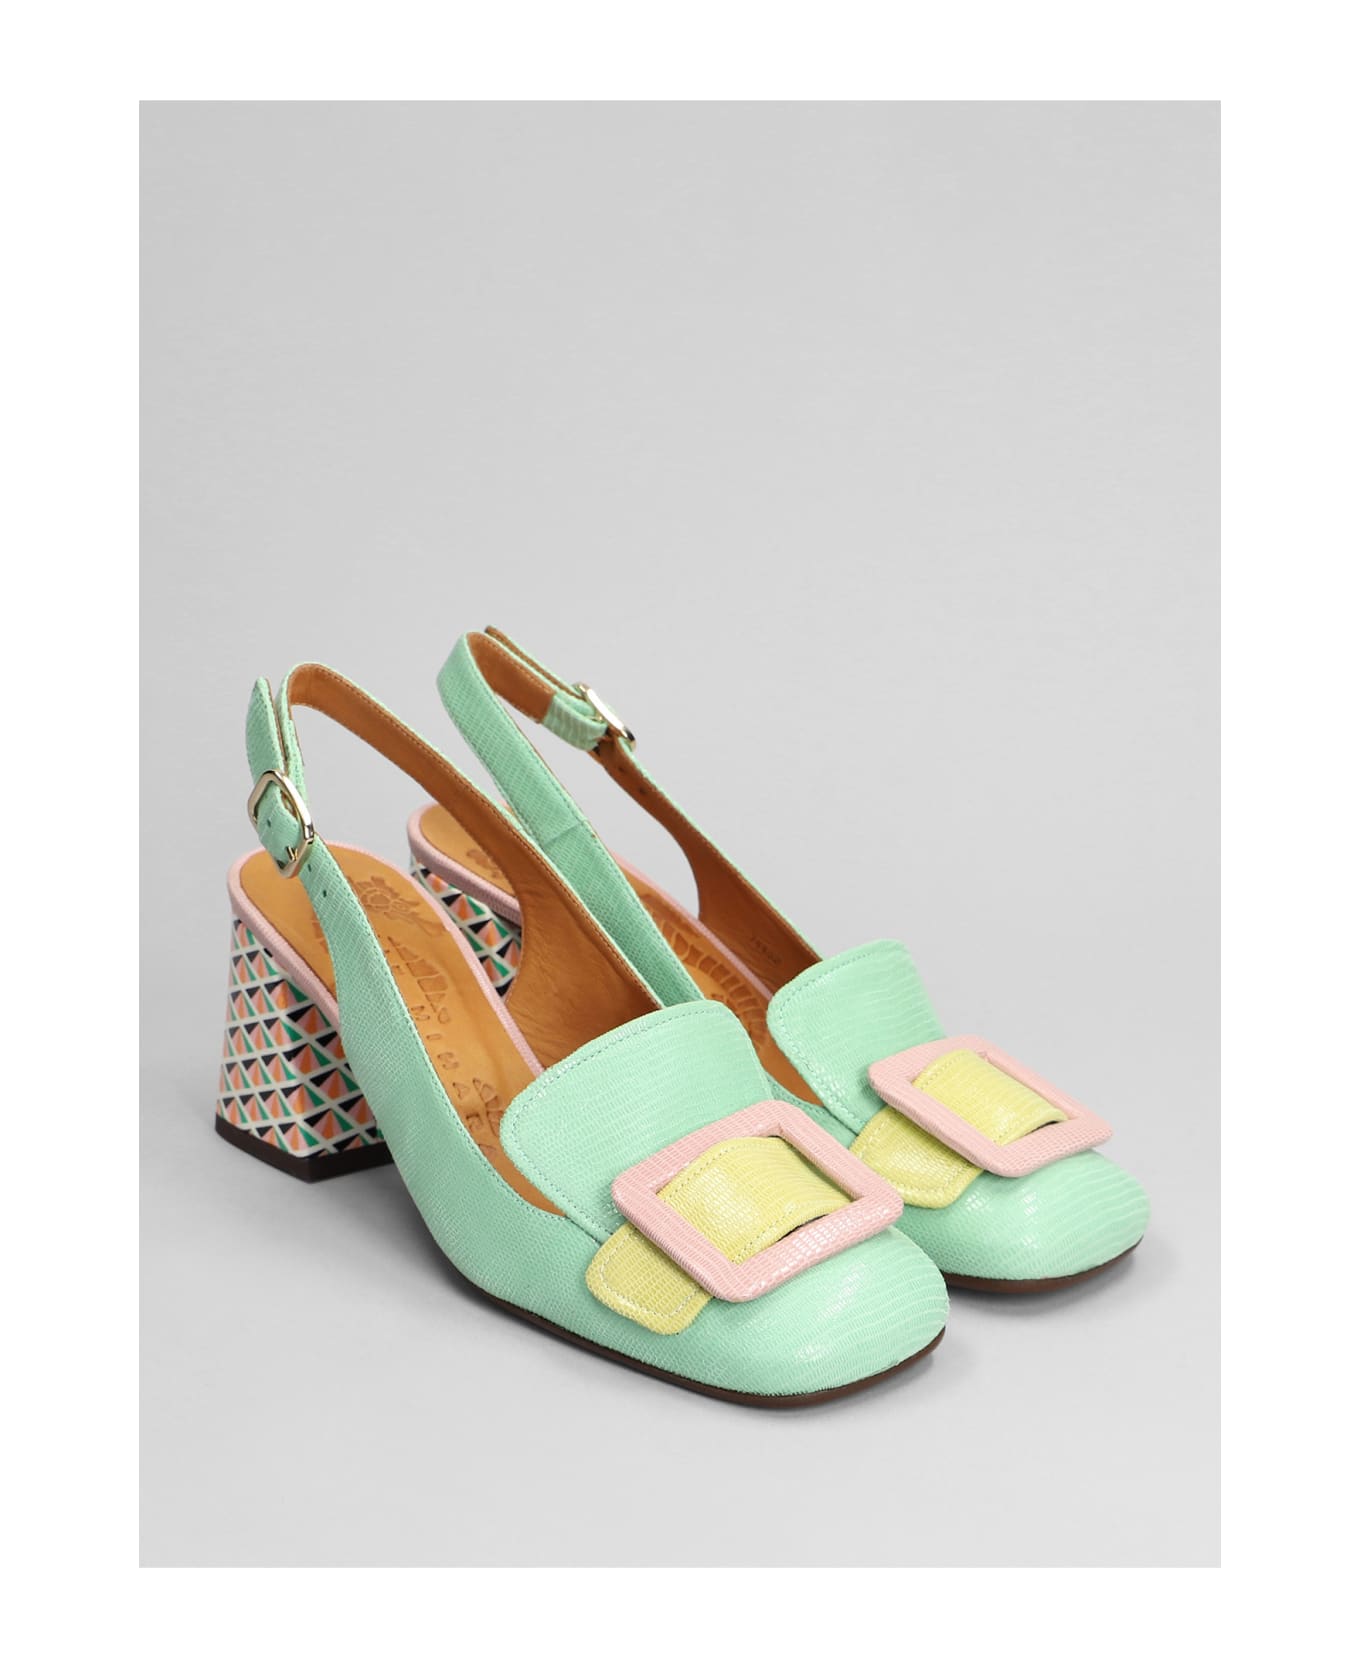 Chie Mihara Suzan Pumps In Green Leather - green ハイヒール